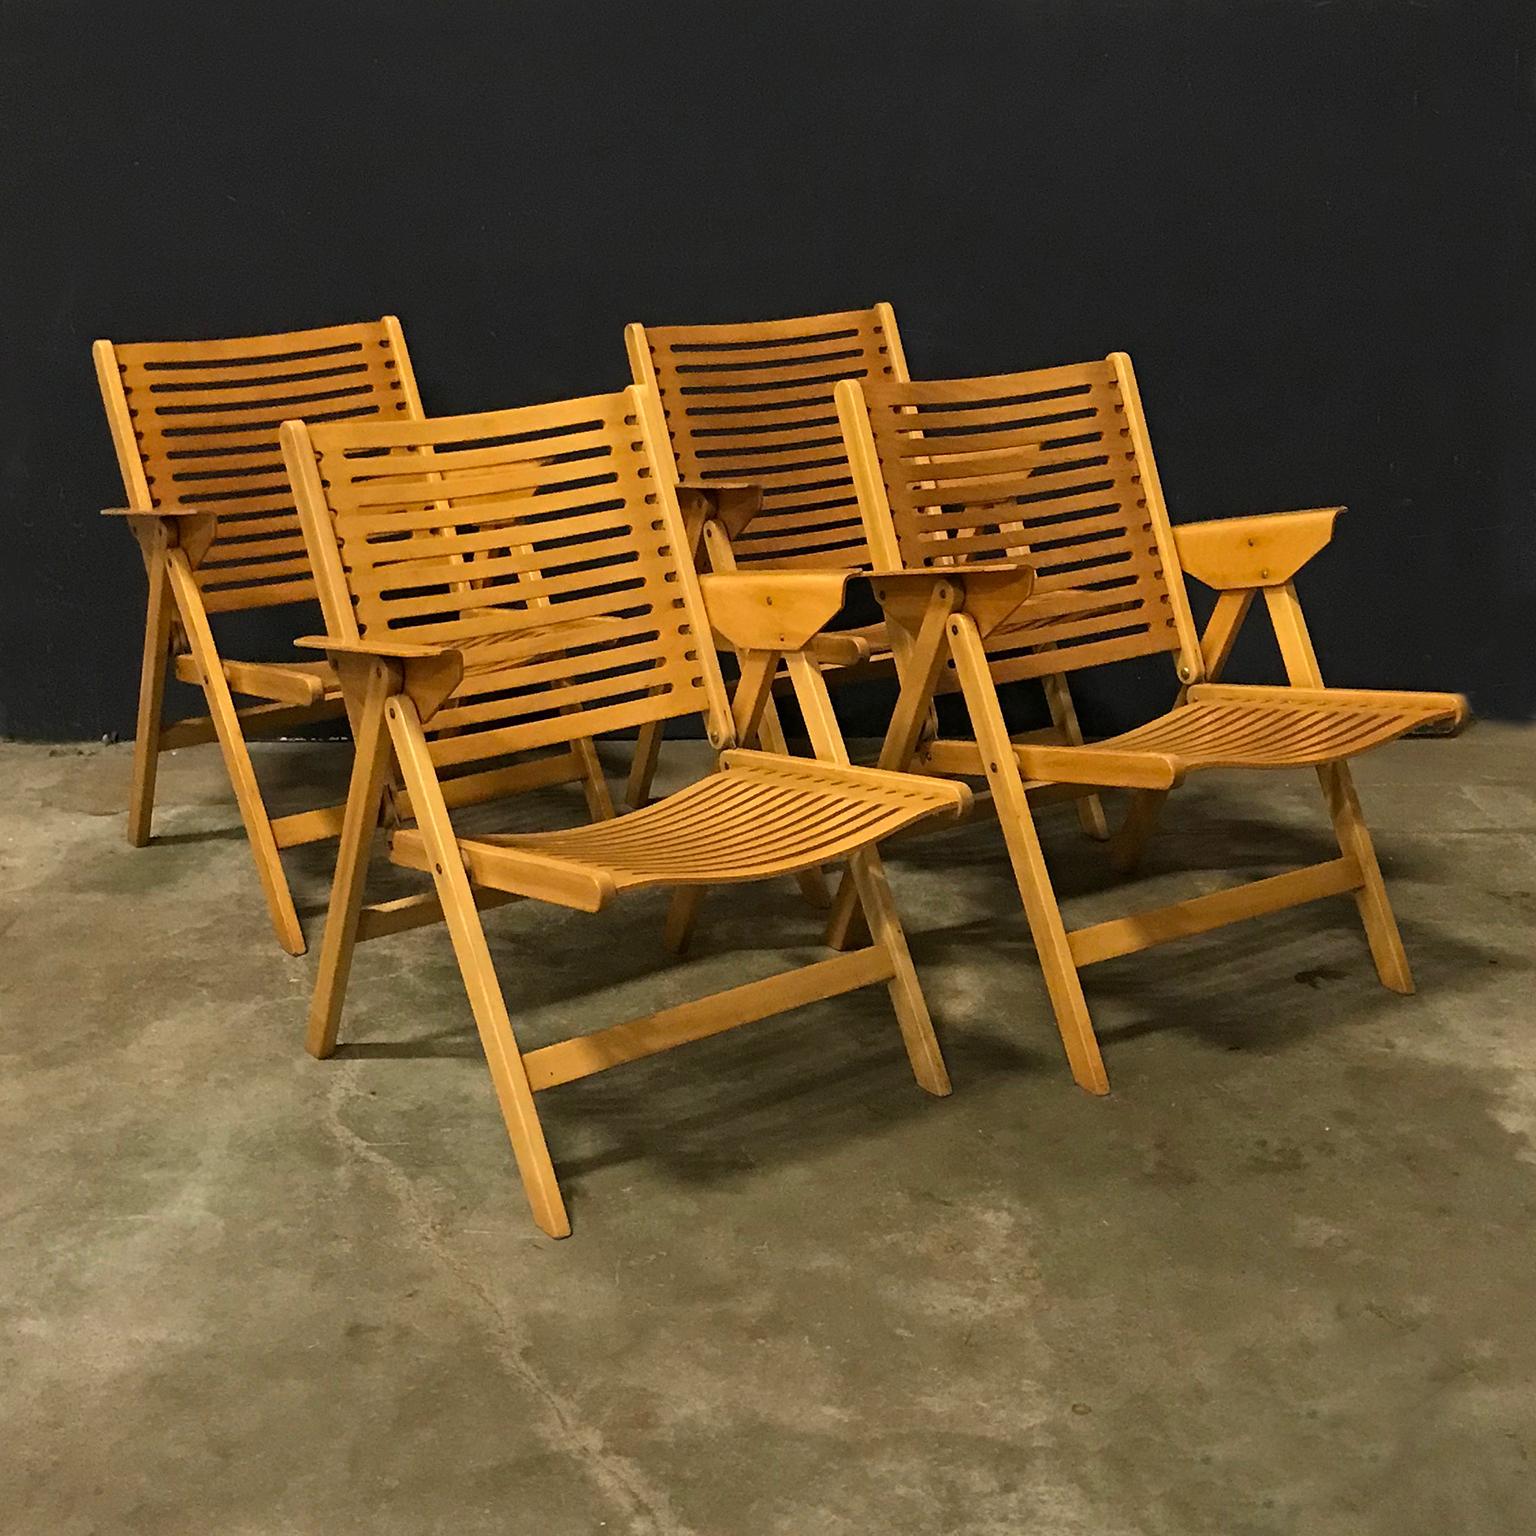 Beautiful Kralj Lounge. The Kralj lounge is a beautiful foldable chair. We offer these Kralj Lounge per piece, but there are four in stock. Now you can buy this one. We can send the pictures of the others on request. Each are in a good condition,